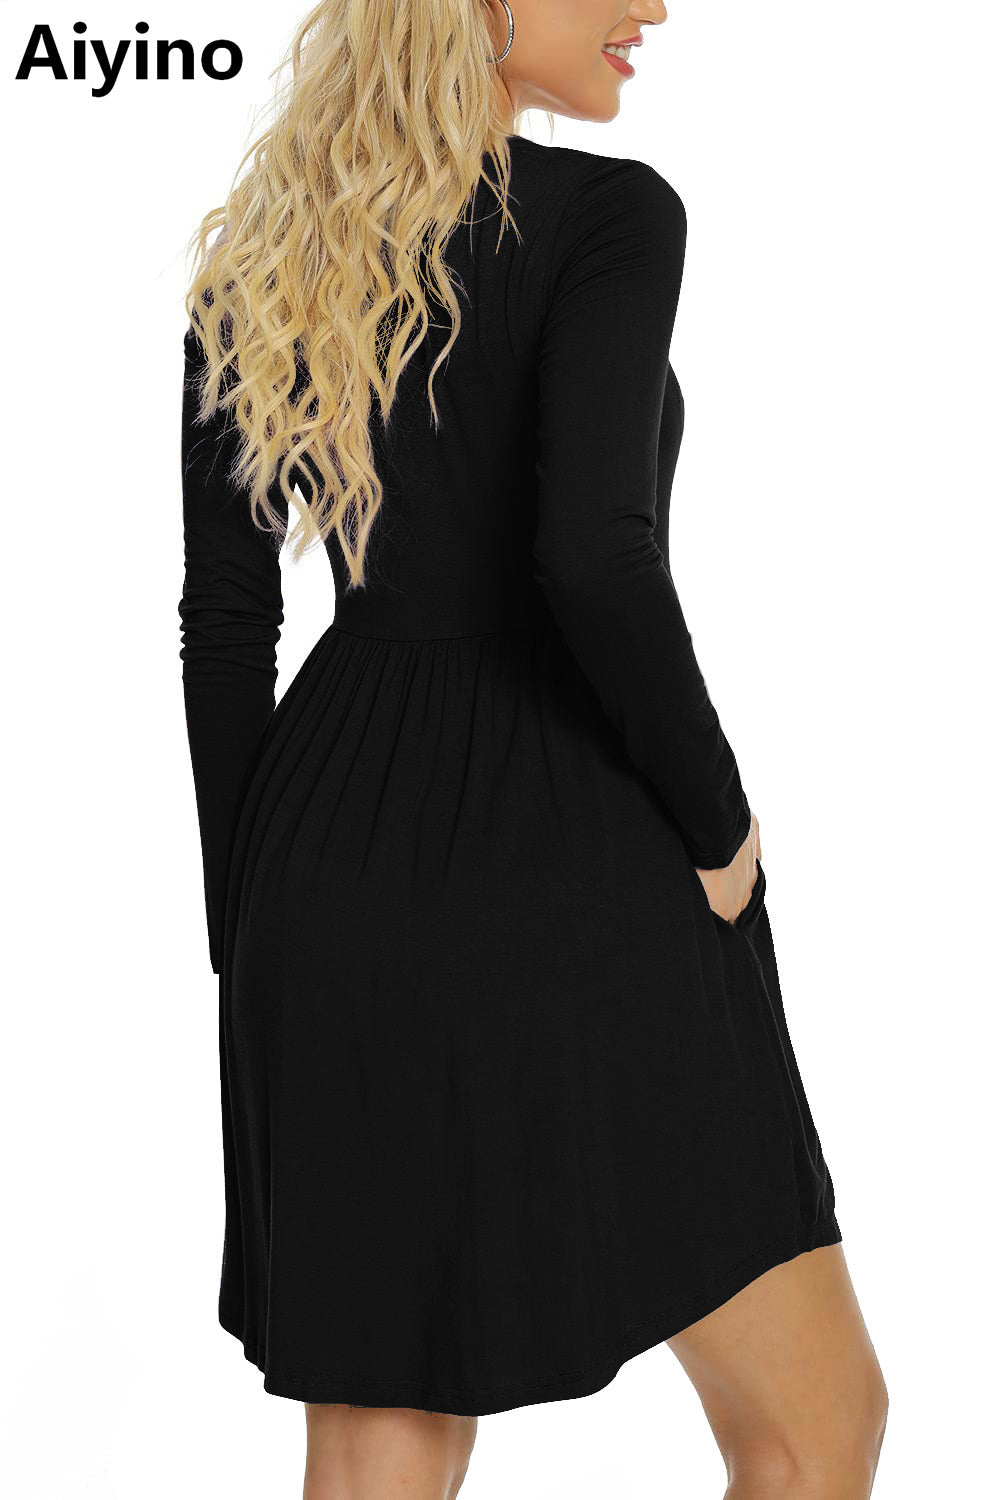 Aiyino Women's Long Sleeve Loose Plain Dresses Casual Short Dress with Pockets